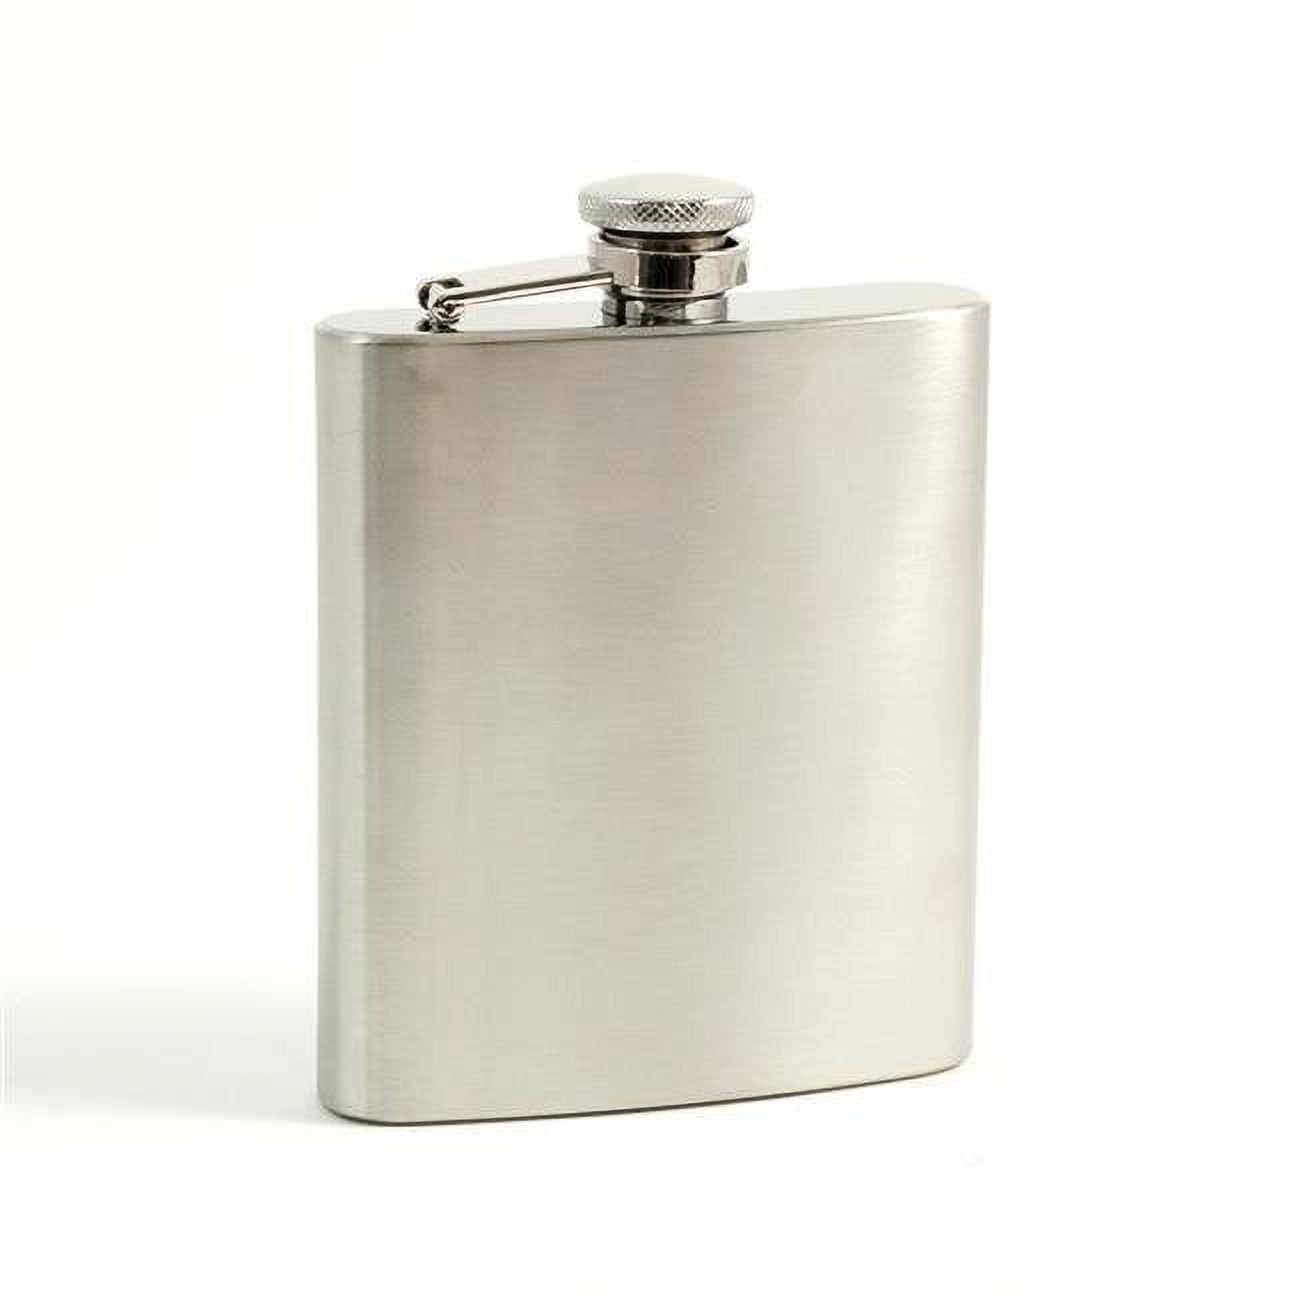 Picture of Bey-Berk International FS107S 7 oz Stainless Steel Flask in a Satin Finish with Captive Cap &amp; Durable Rubber Seal - Silver